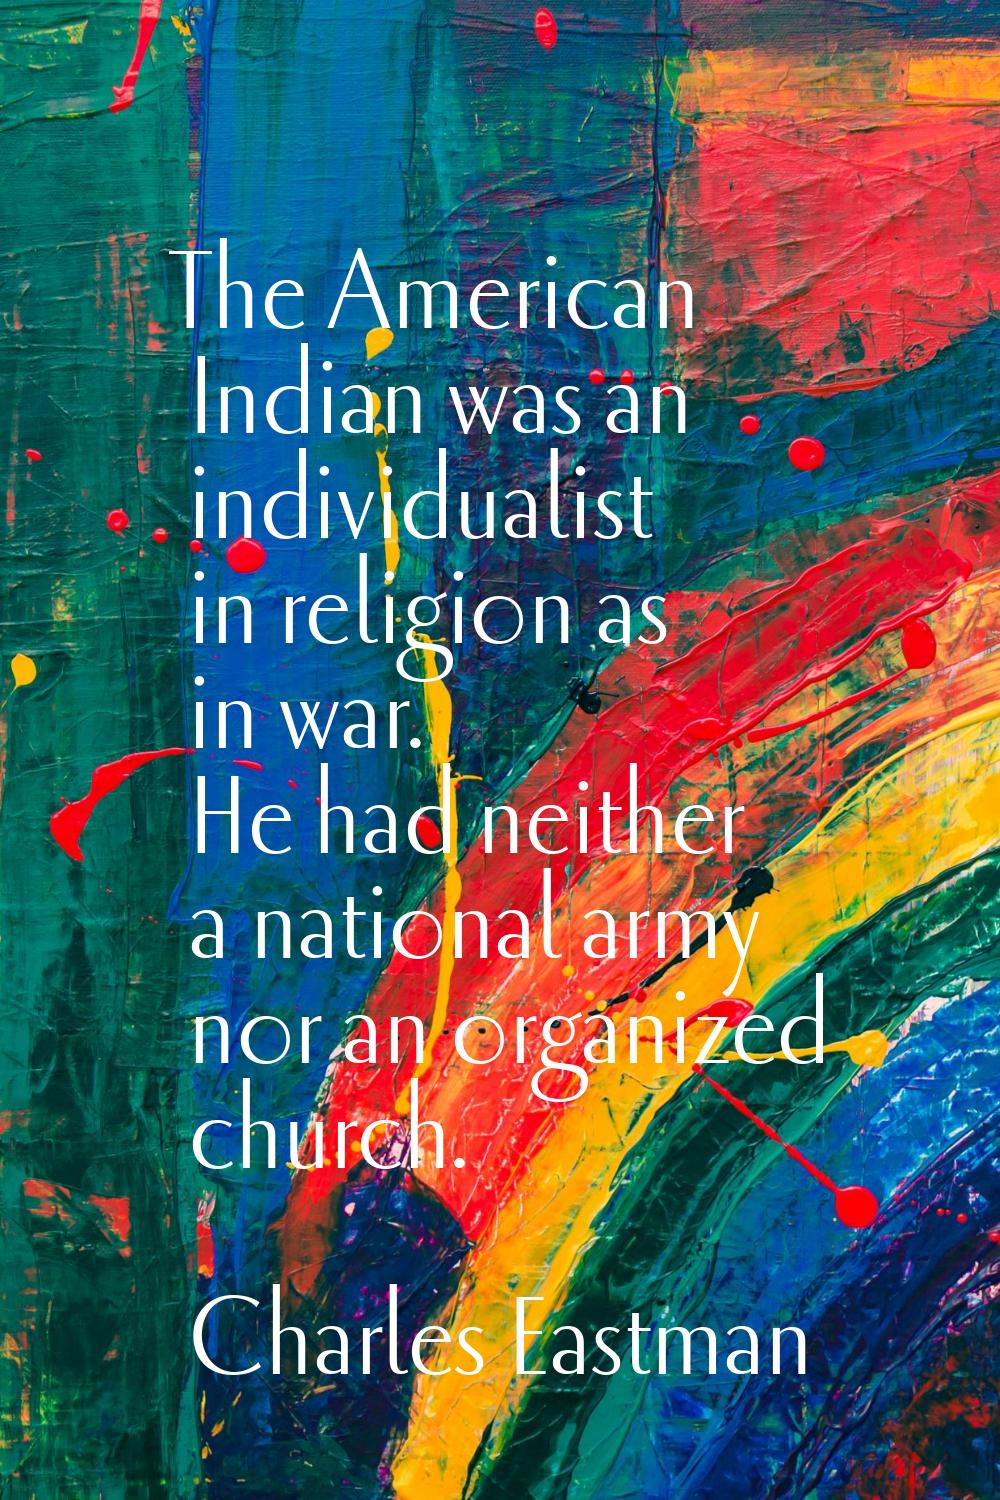 The American Indian was an individualist in religion as in war. He had neither a national army nor 